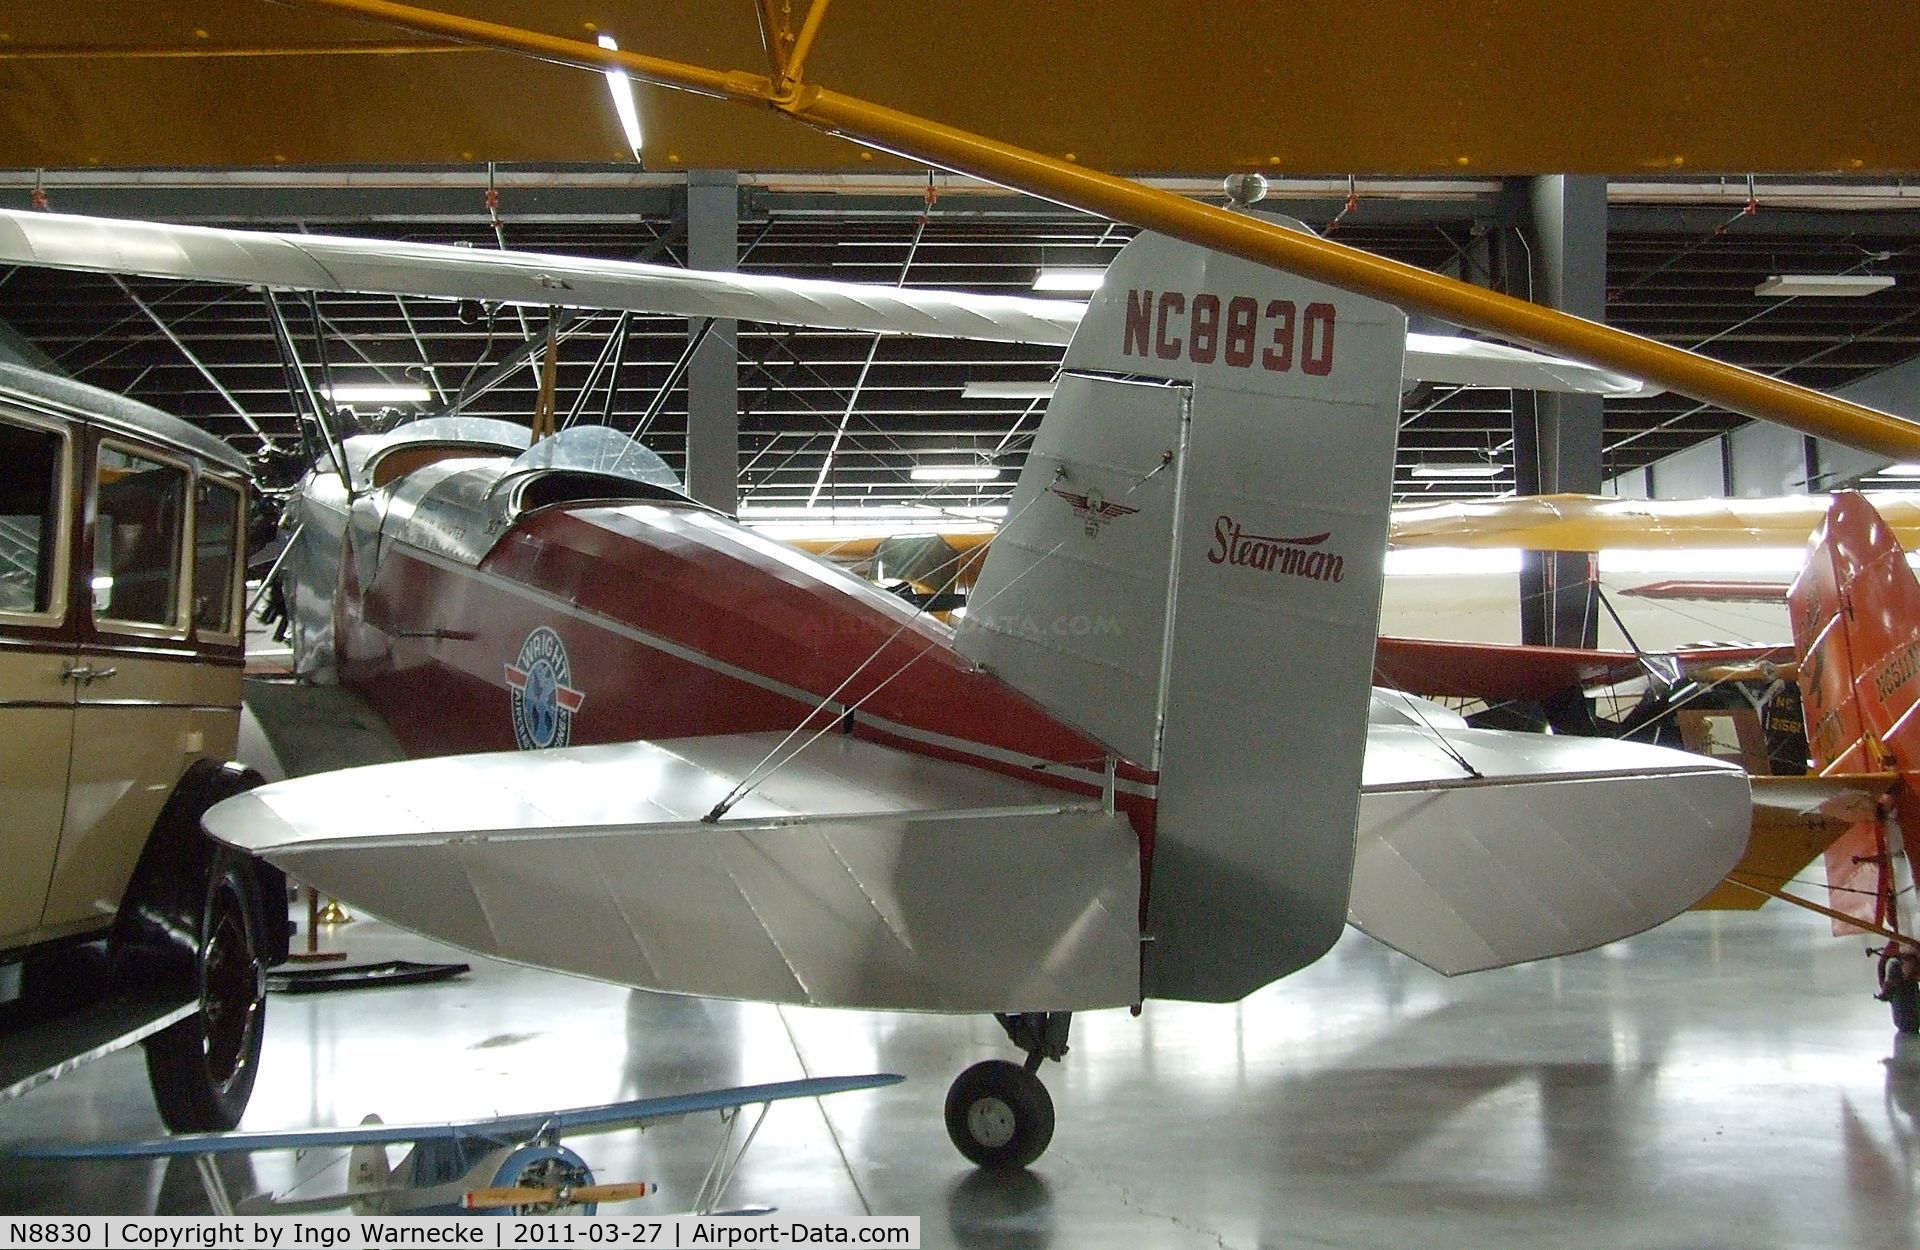 N8830, 1928 Stearman C3-B Sport Commercial C/N 244, Stearman C3-B at the Western Antique Aeroplane and Automobile Museum, Hood River OR